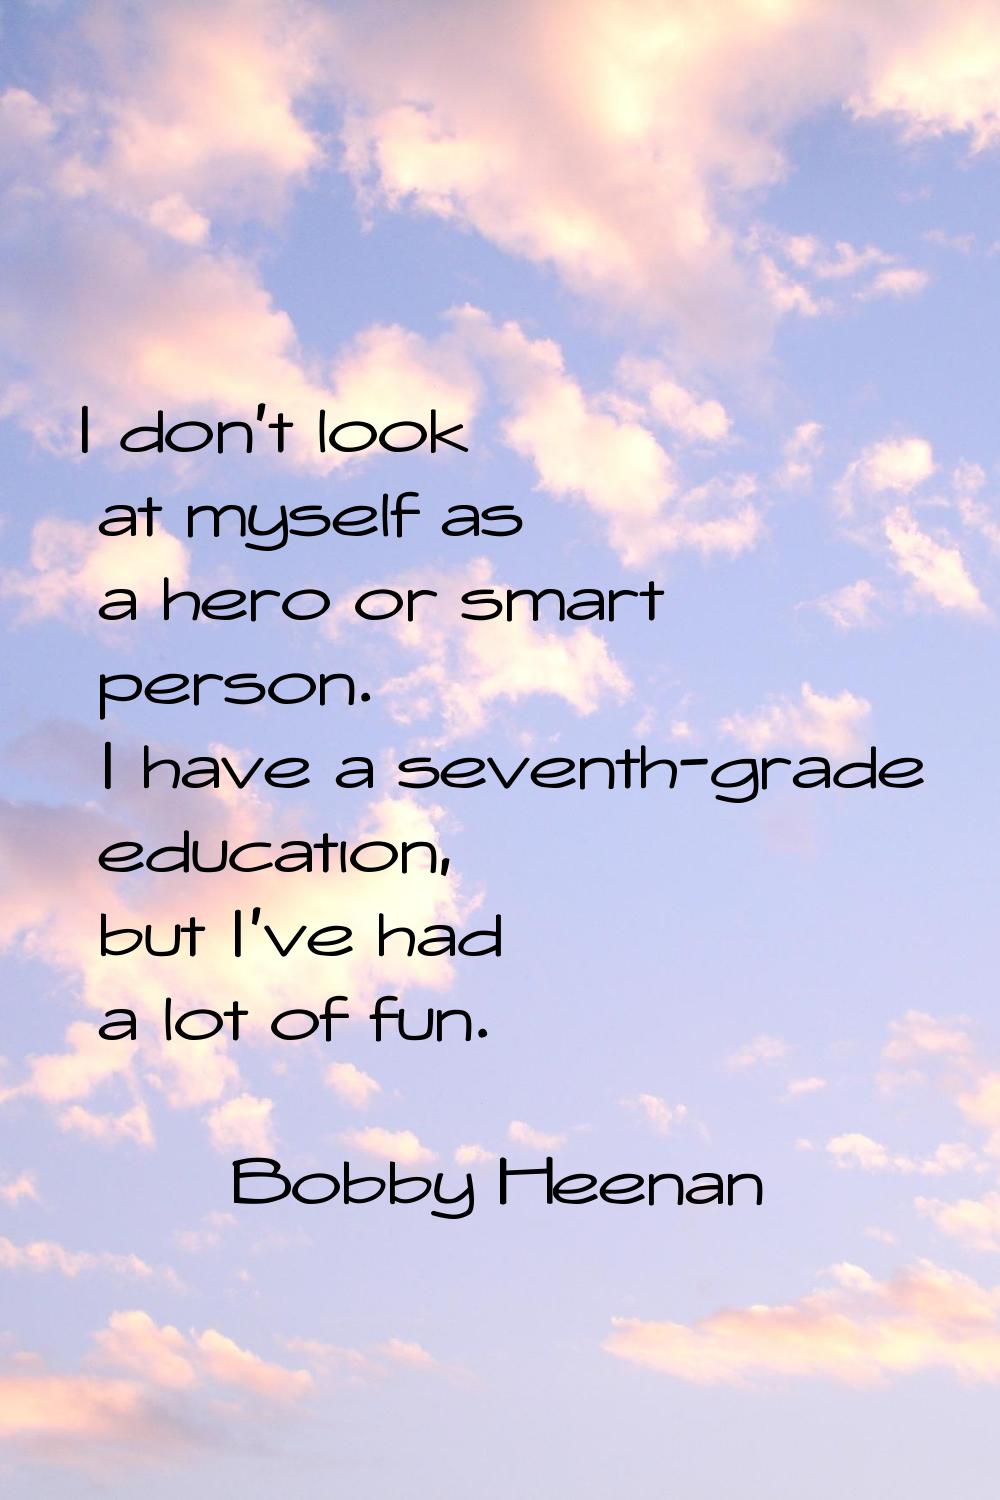 I don't look at myself as a hero or smart person. I have a seventh-grade education, but I've had a 